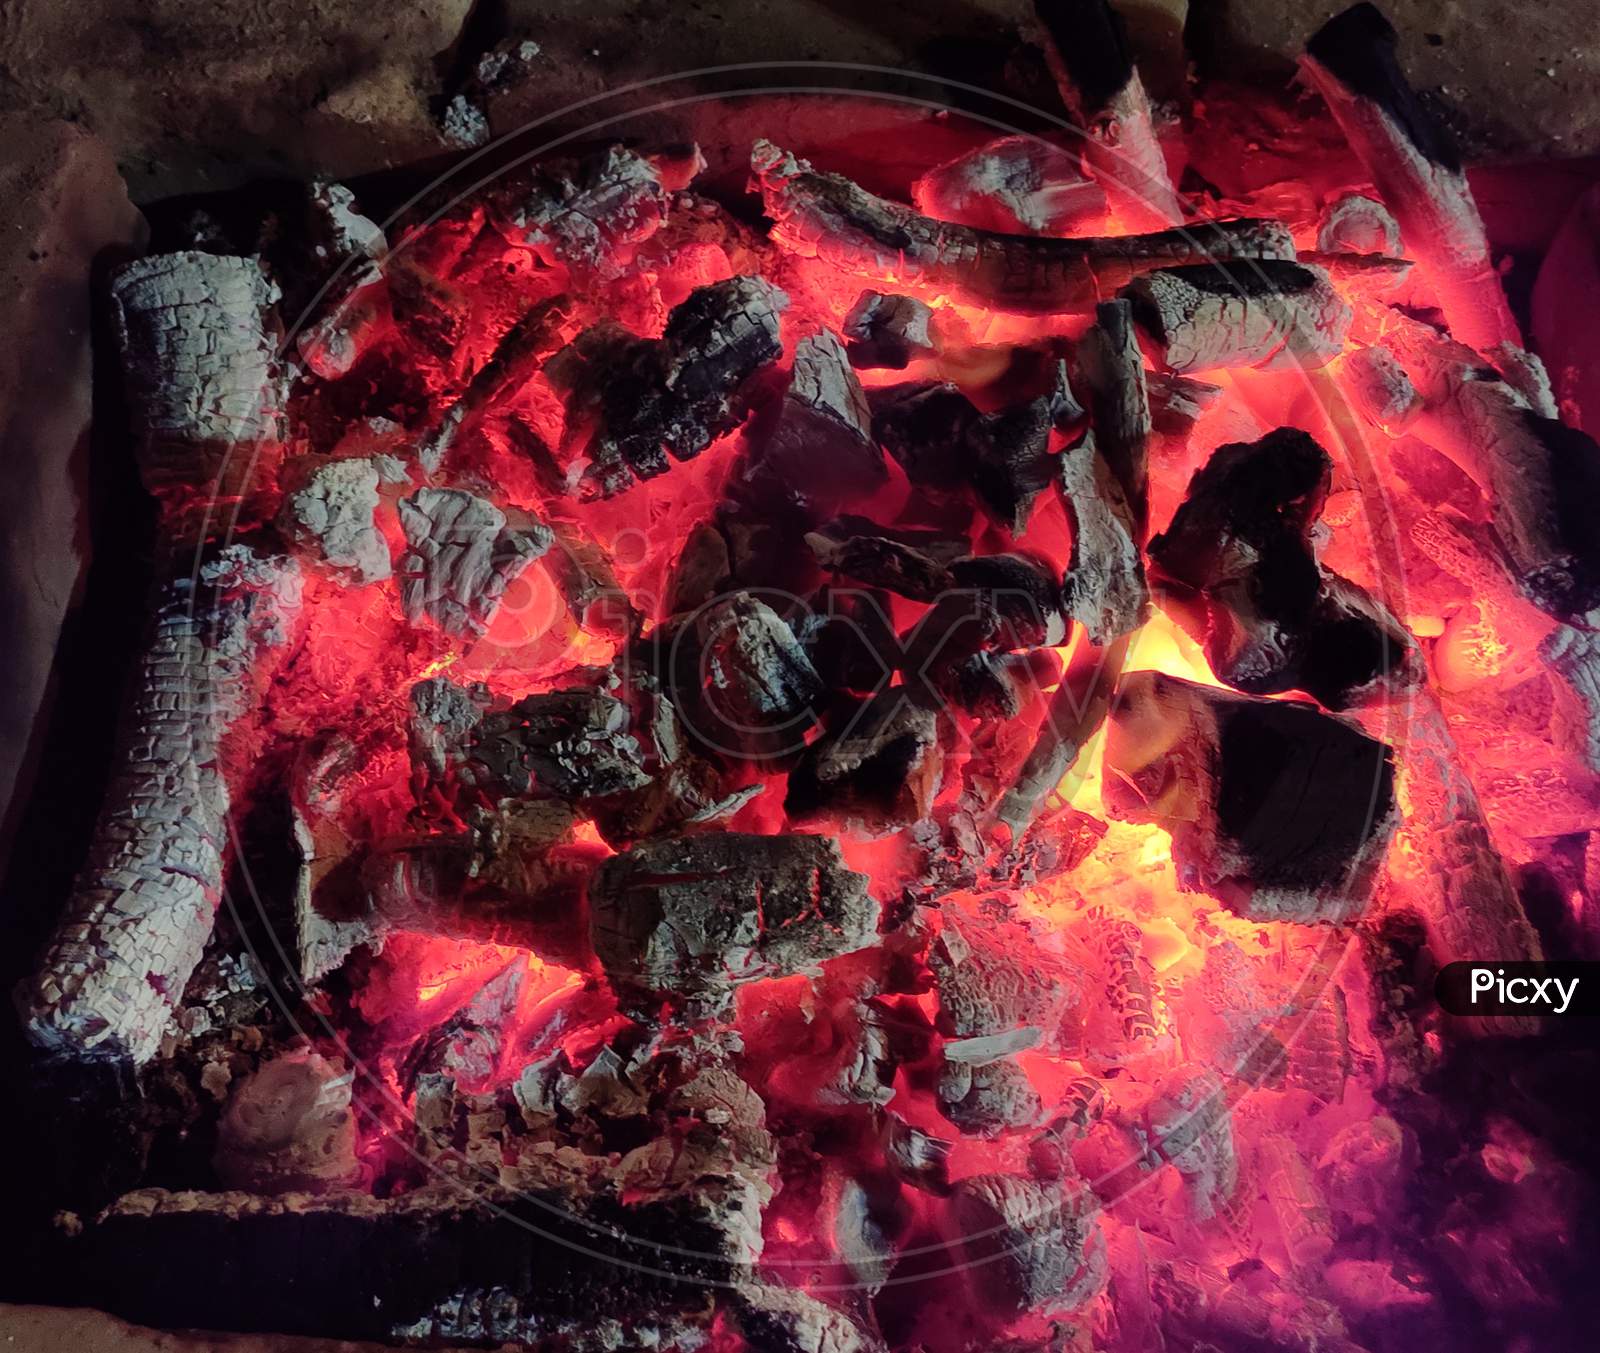 Close Up View of Glowing And Flaming Hot Charcoal. Burning Charcoal in the Background. Hot Sparking Coals Burning.